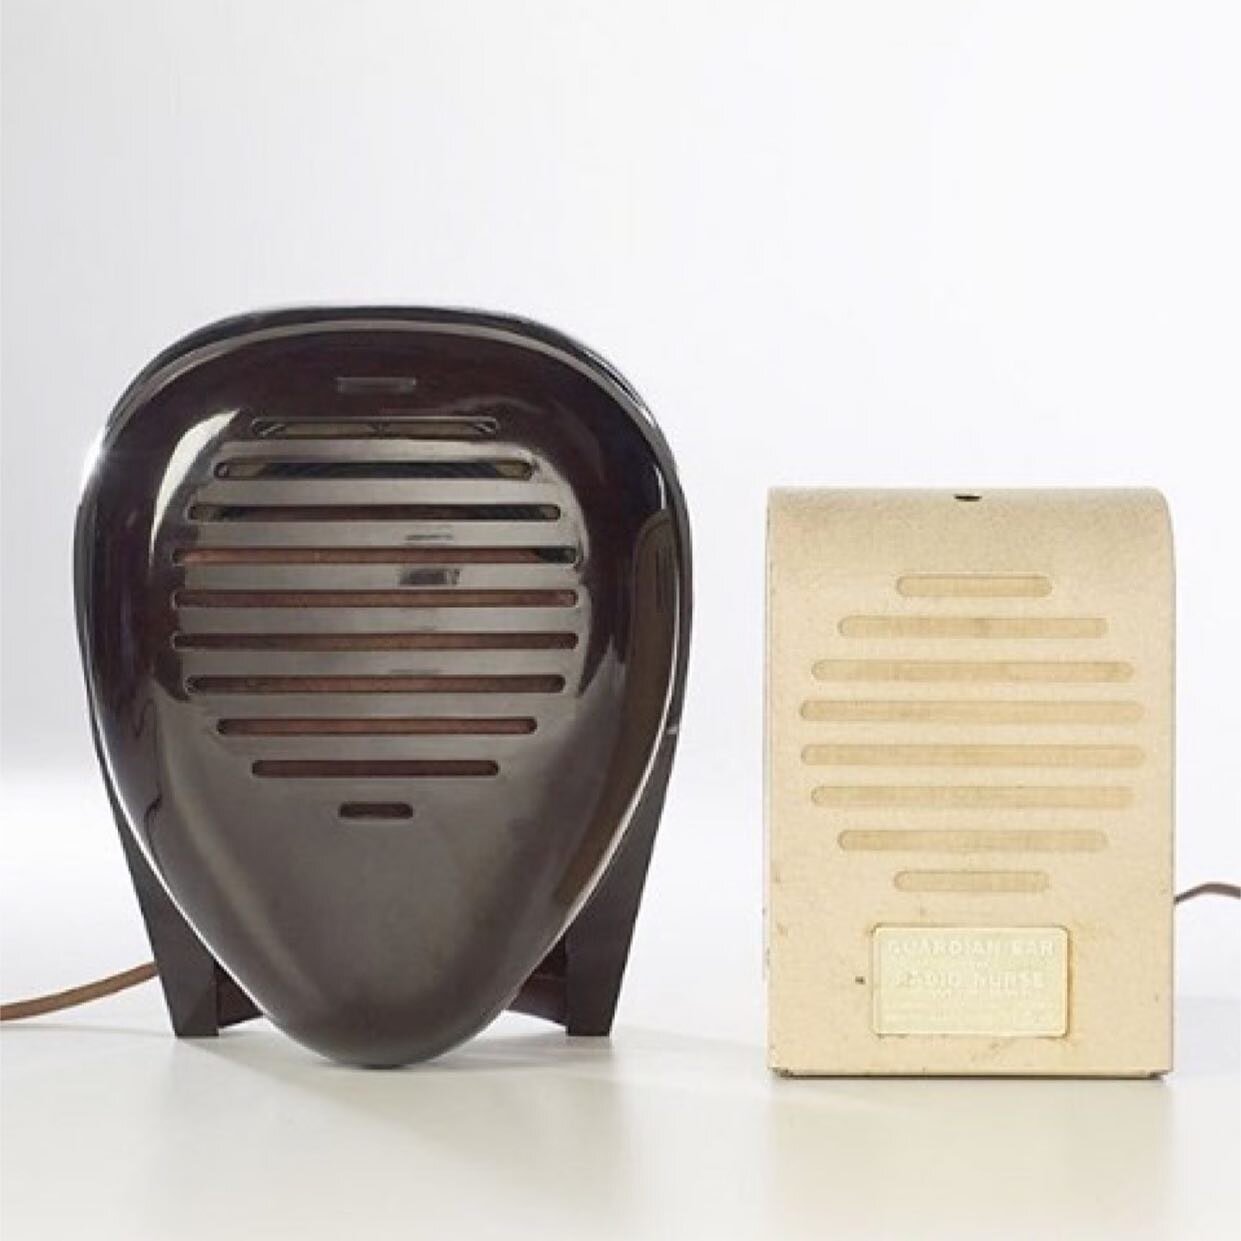 ISAMU NOGUCHI, Radio Nurse and Guardian Ear, phenolic plastic (Bakelite),1937. This pioneering baby monitor &ndash; inspired in part by the notorious Lindbergh kidnapping of 1932 &ndash; gave parents peace of mind when their children were sleeping in